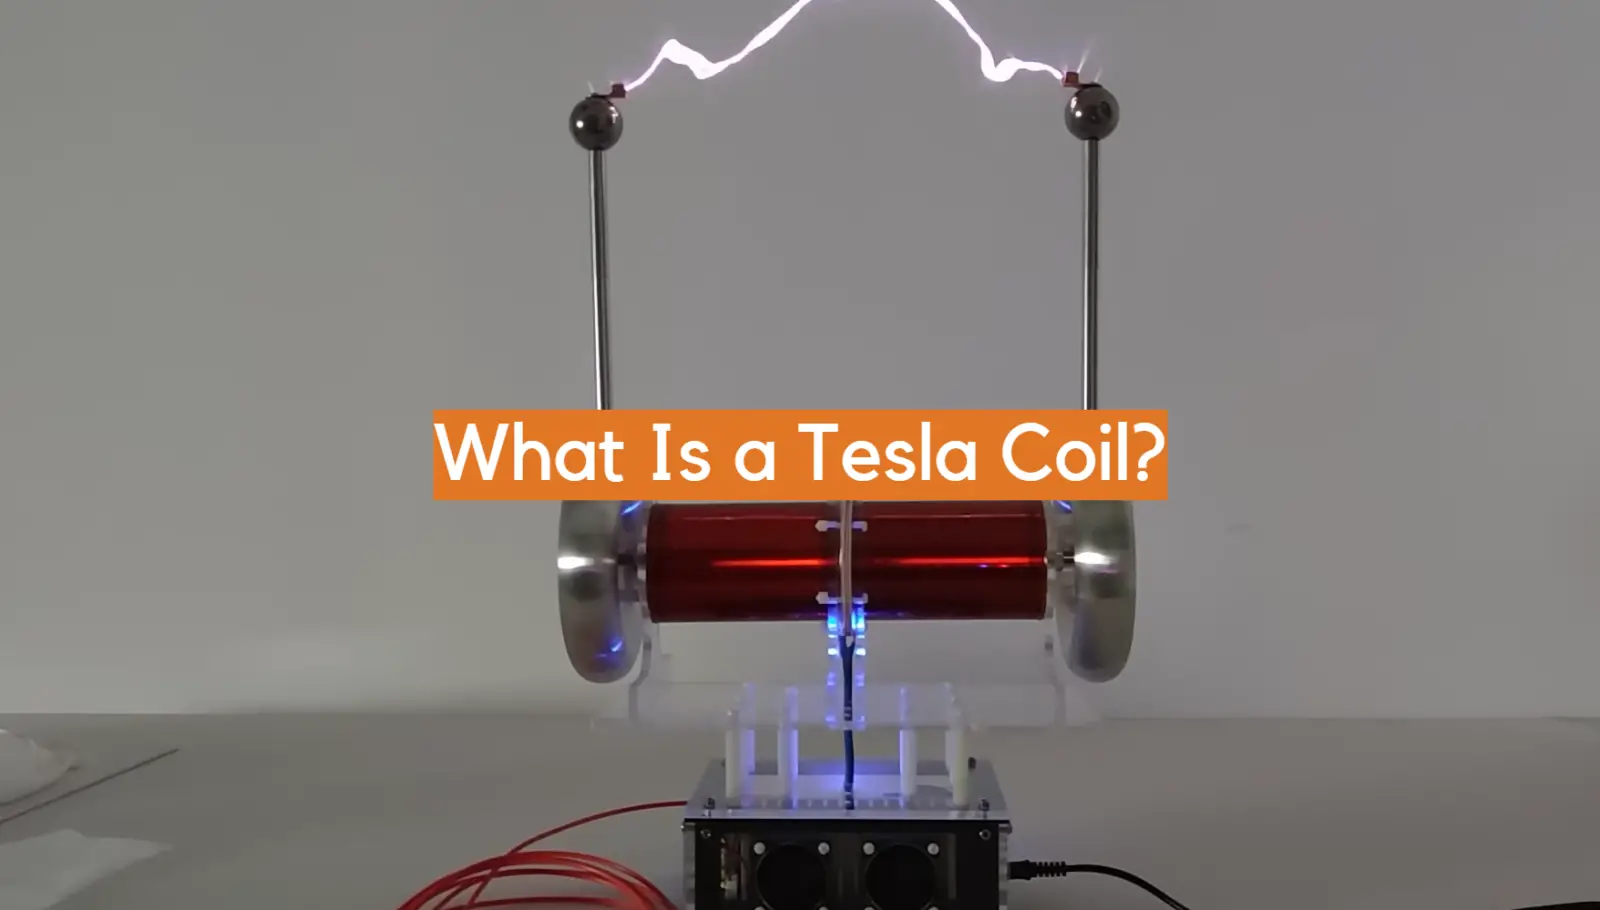 What Is a Tesla Coil?